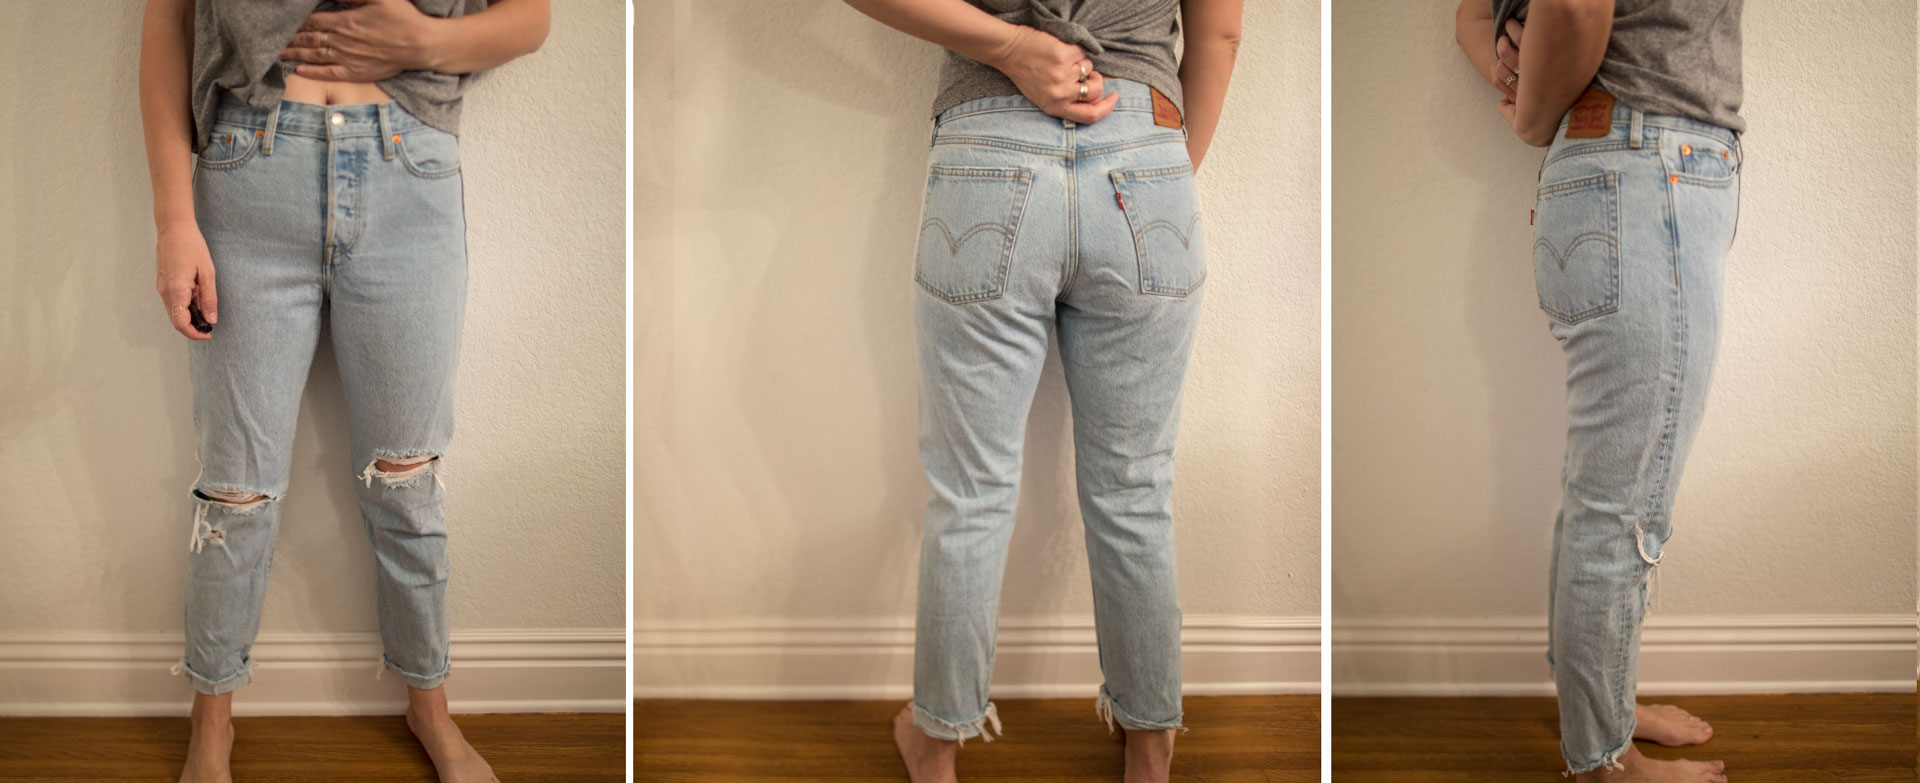 Finding the Right Jeans | Vintage Levi's Fit Guide - THIS MOM'S GONNA SNAP!